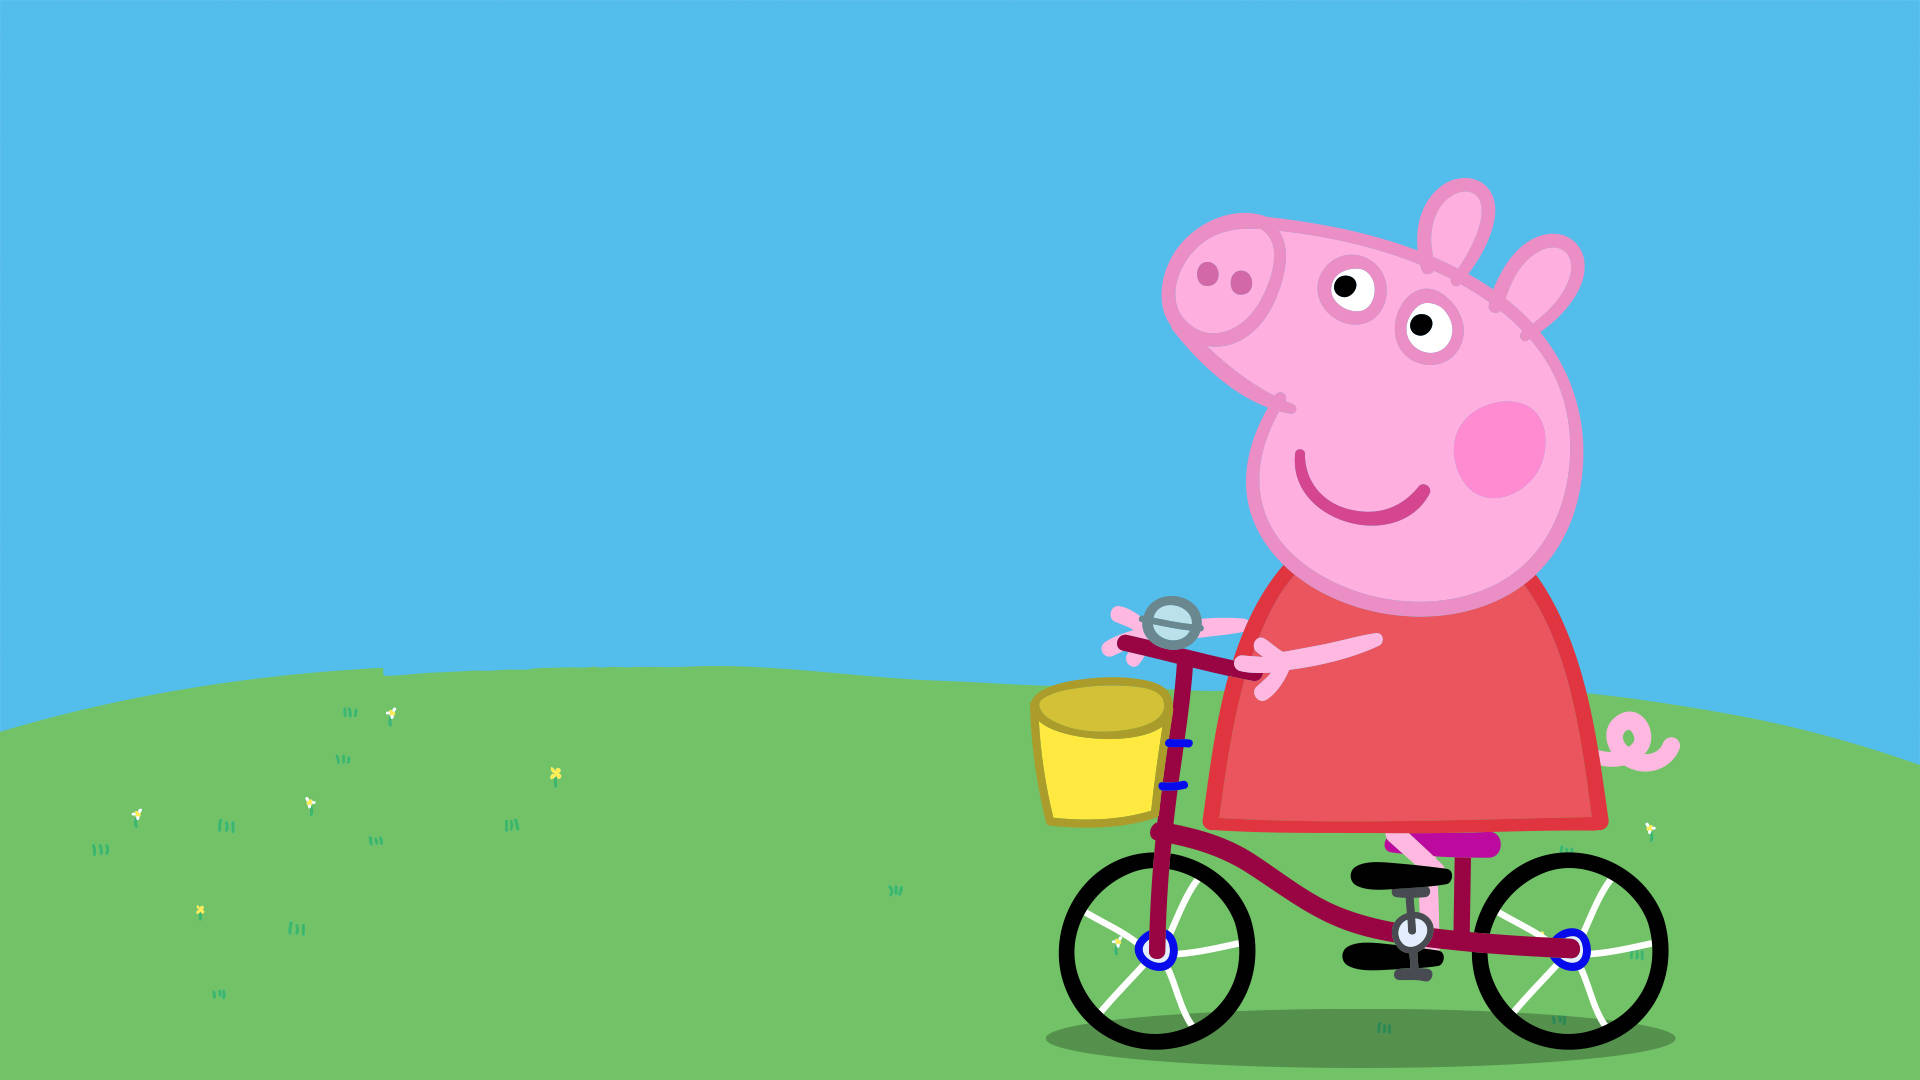 Bicycling Peppa Pig Background